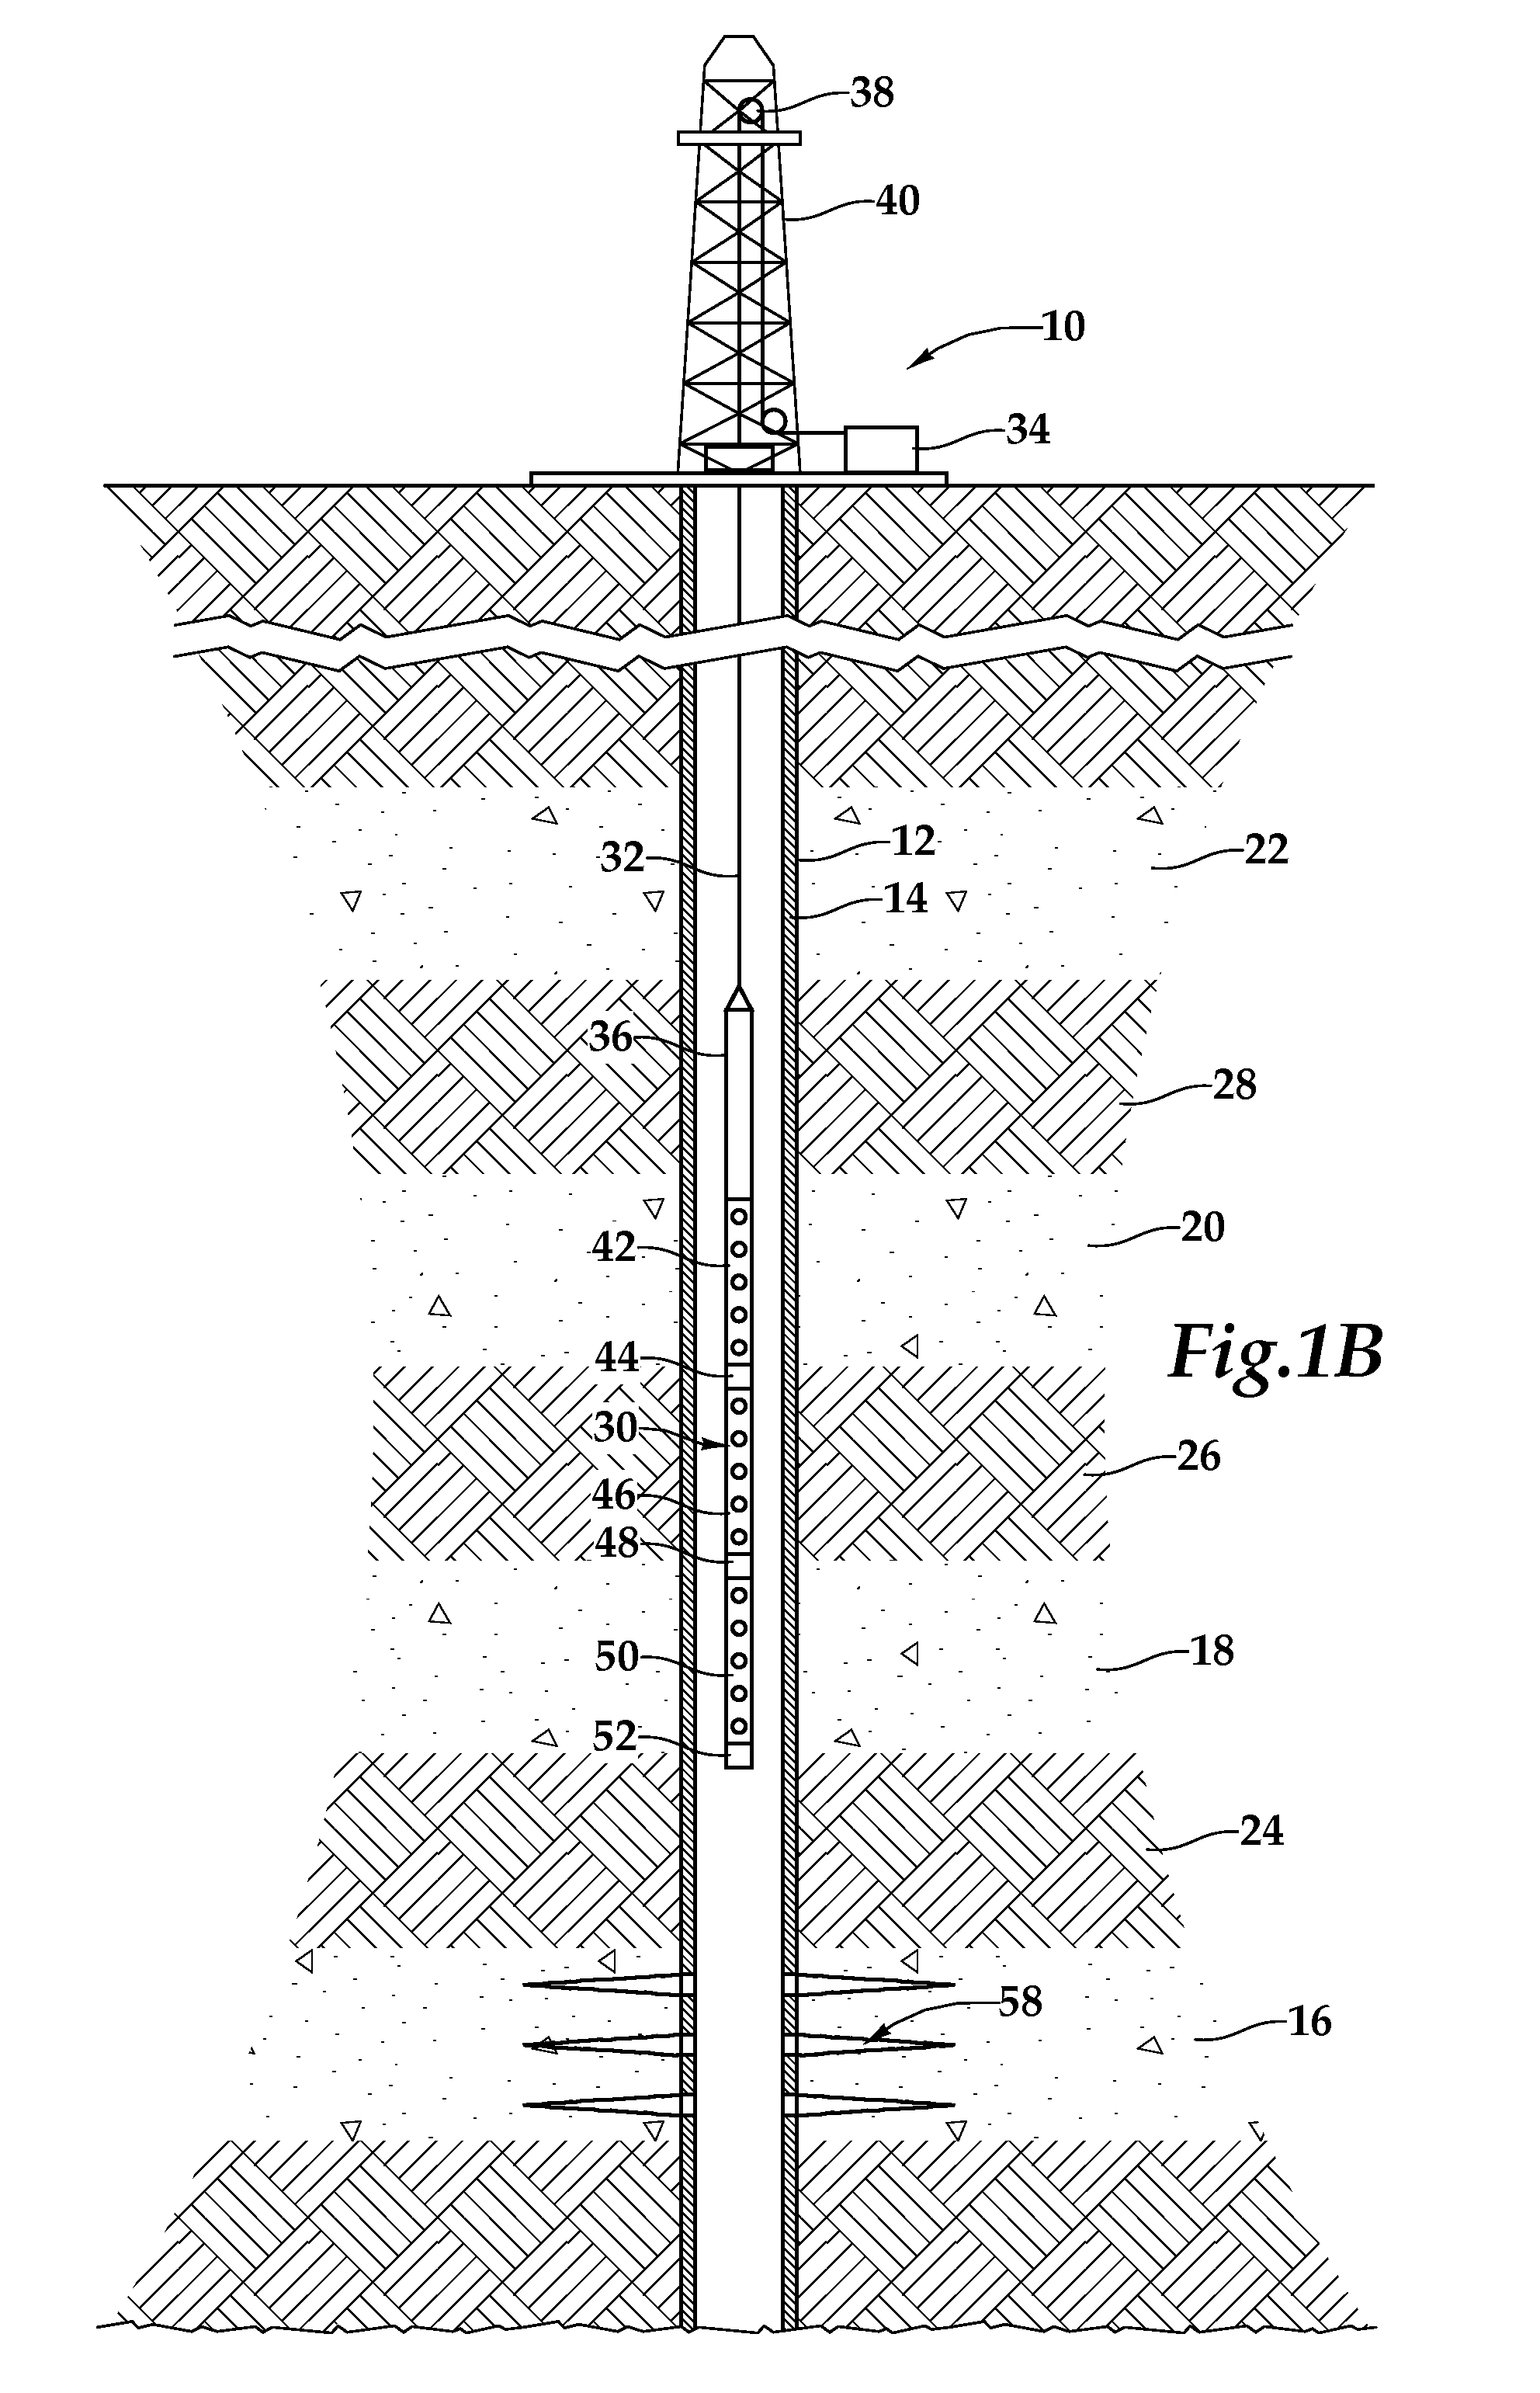 System and Method for Selective Activation of Downhole Devices in a Tool String